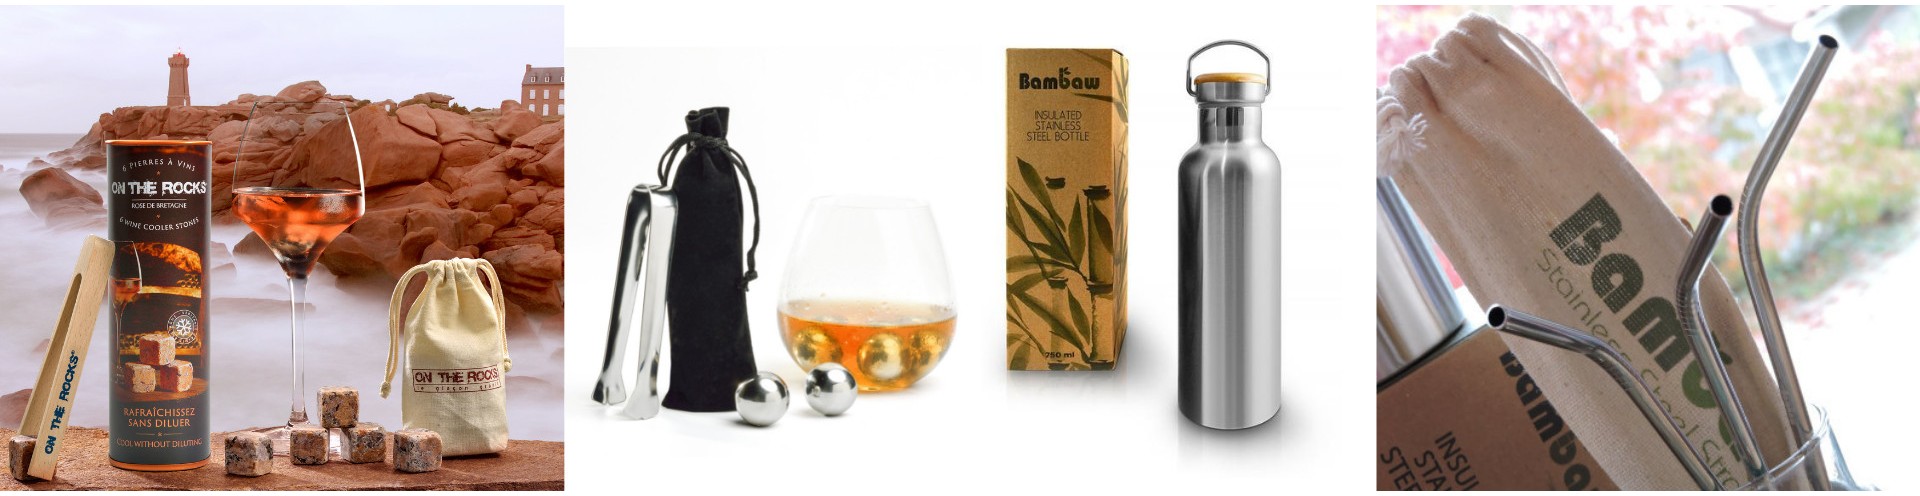 Accessories for beverages